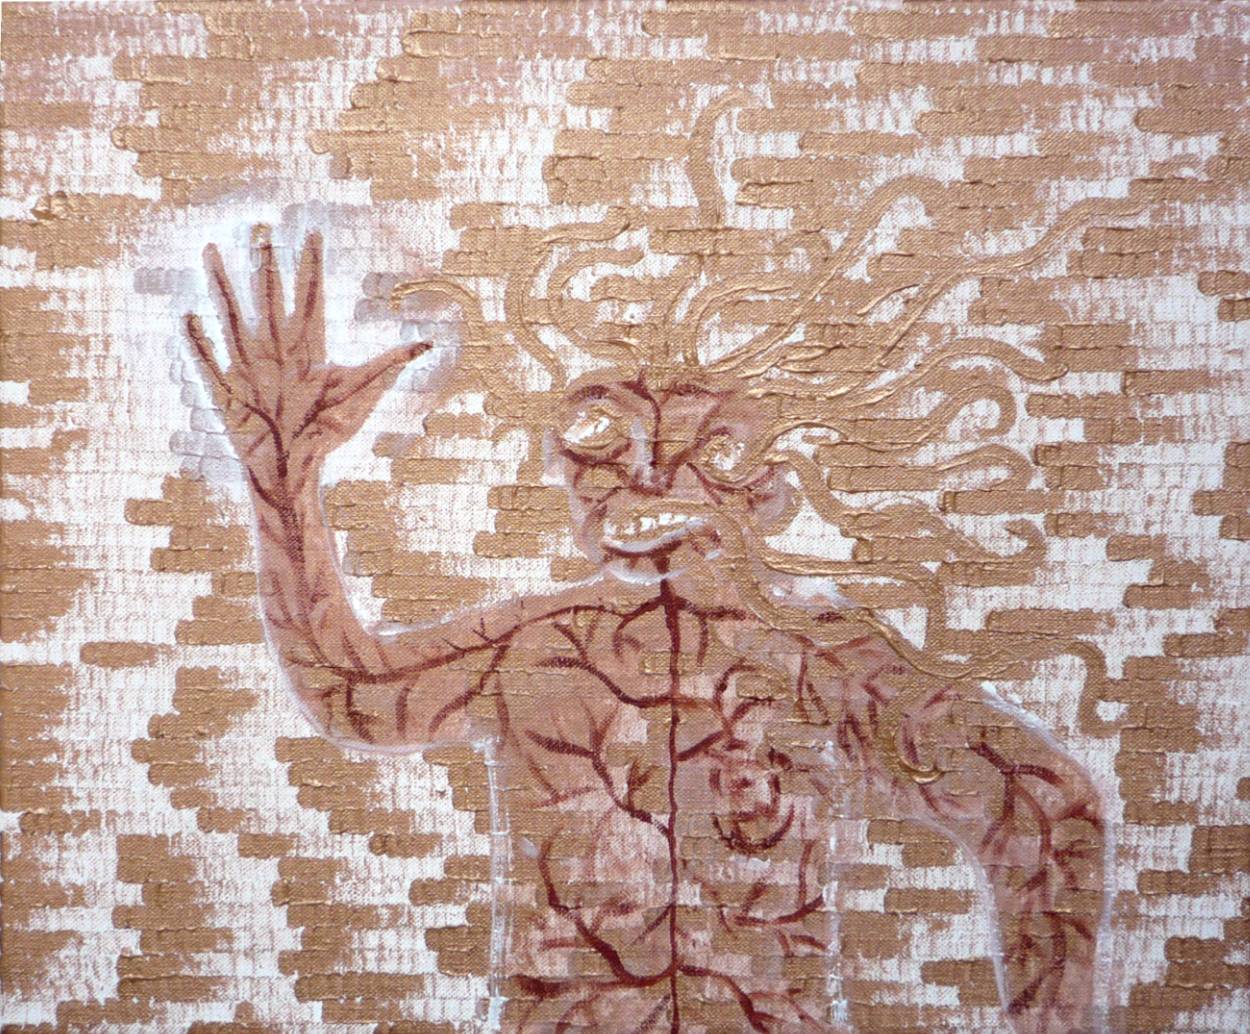 Jan Karpíšek: Whose hand and the rest in flowing of time?, acryl on canvas, 45x54 cm, 2008